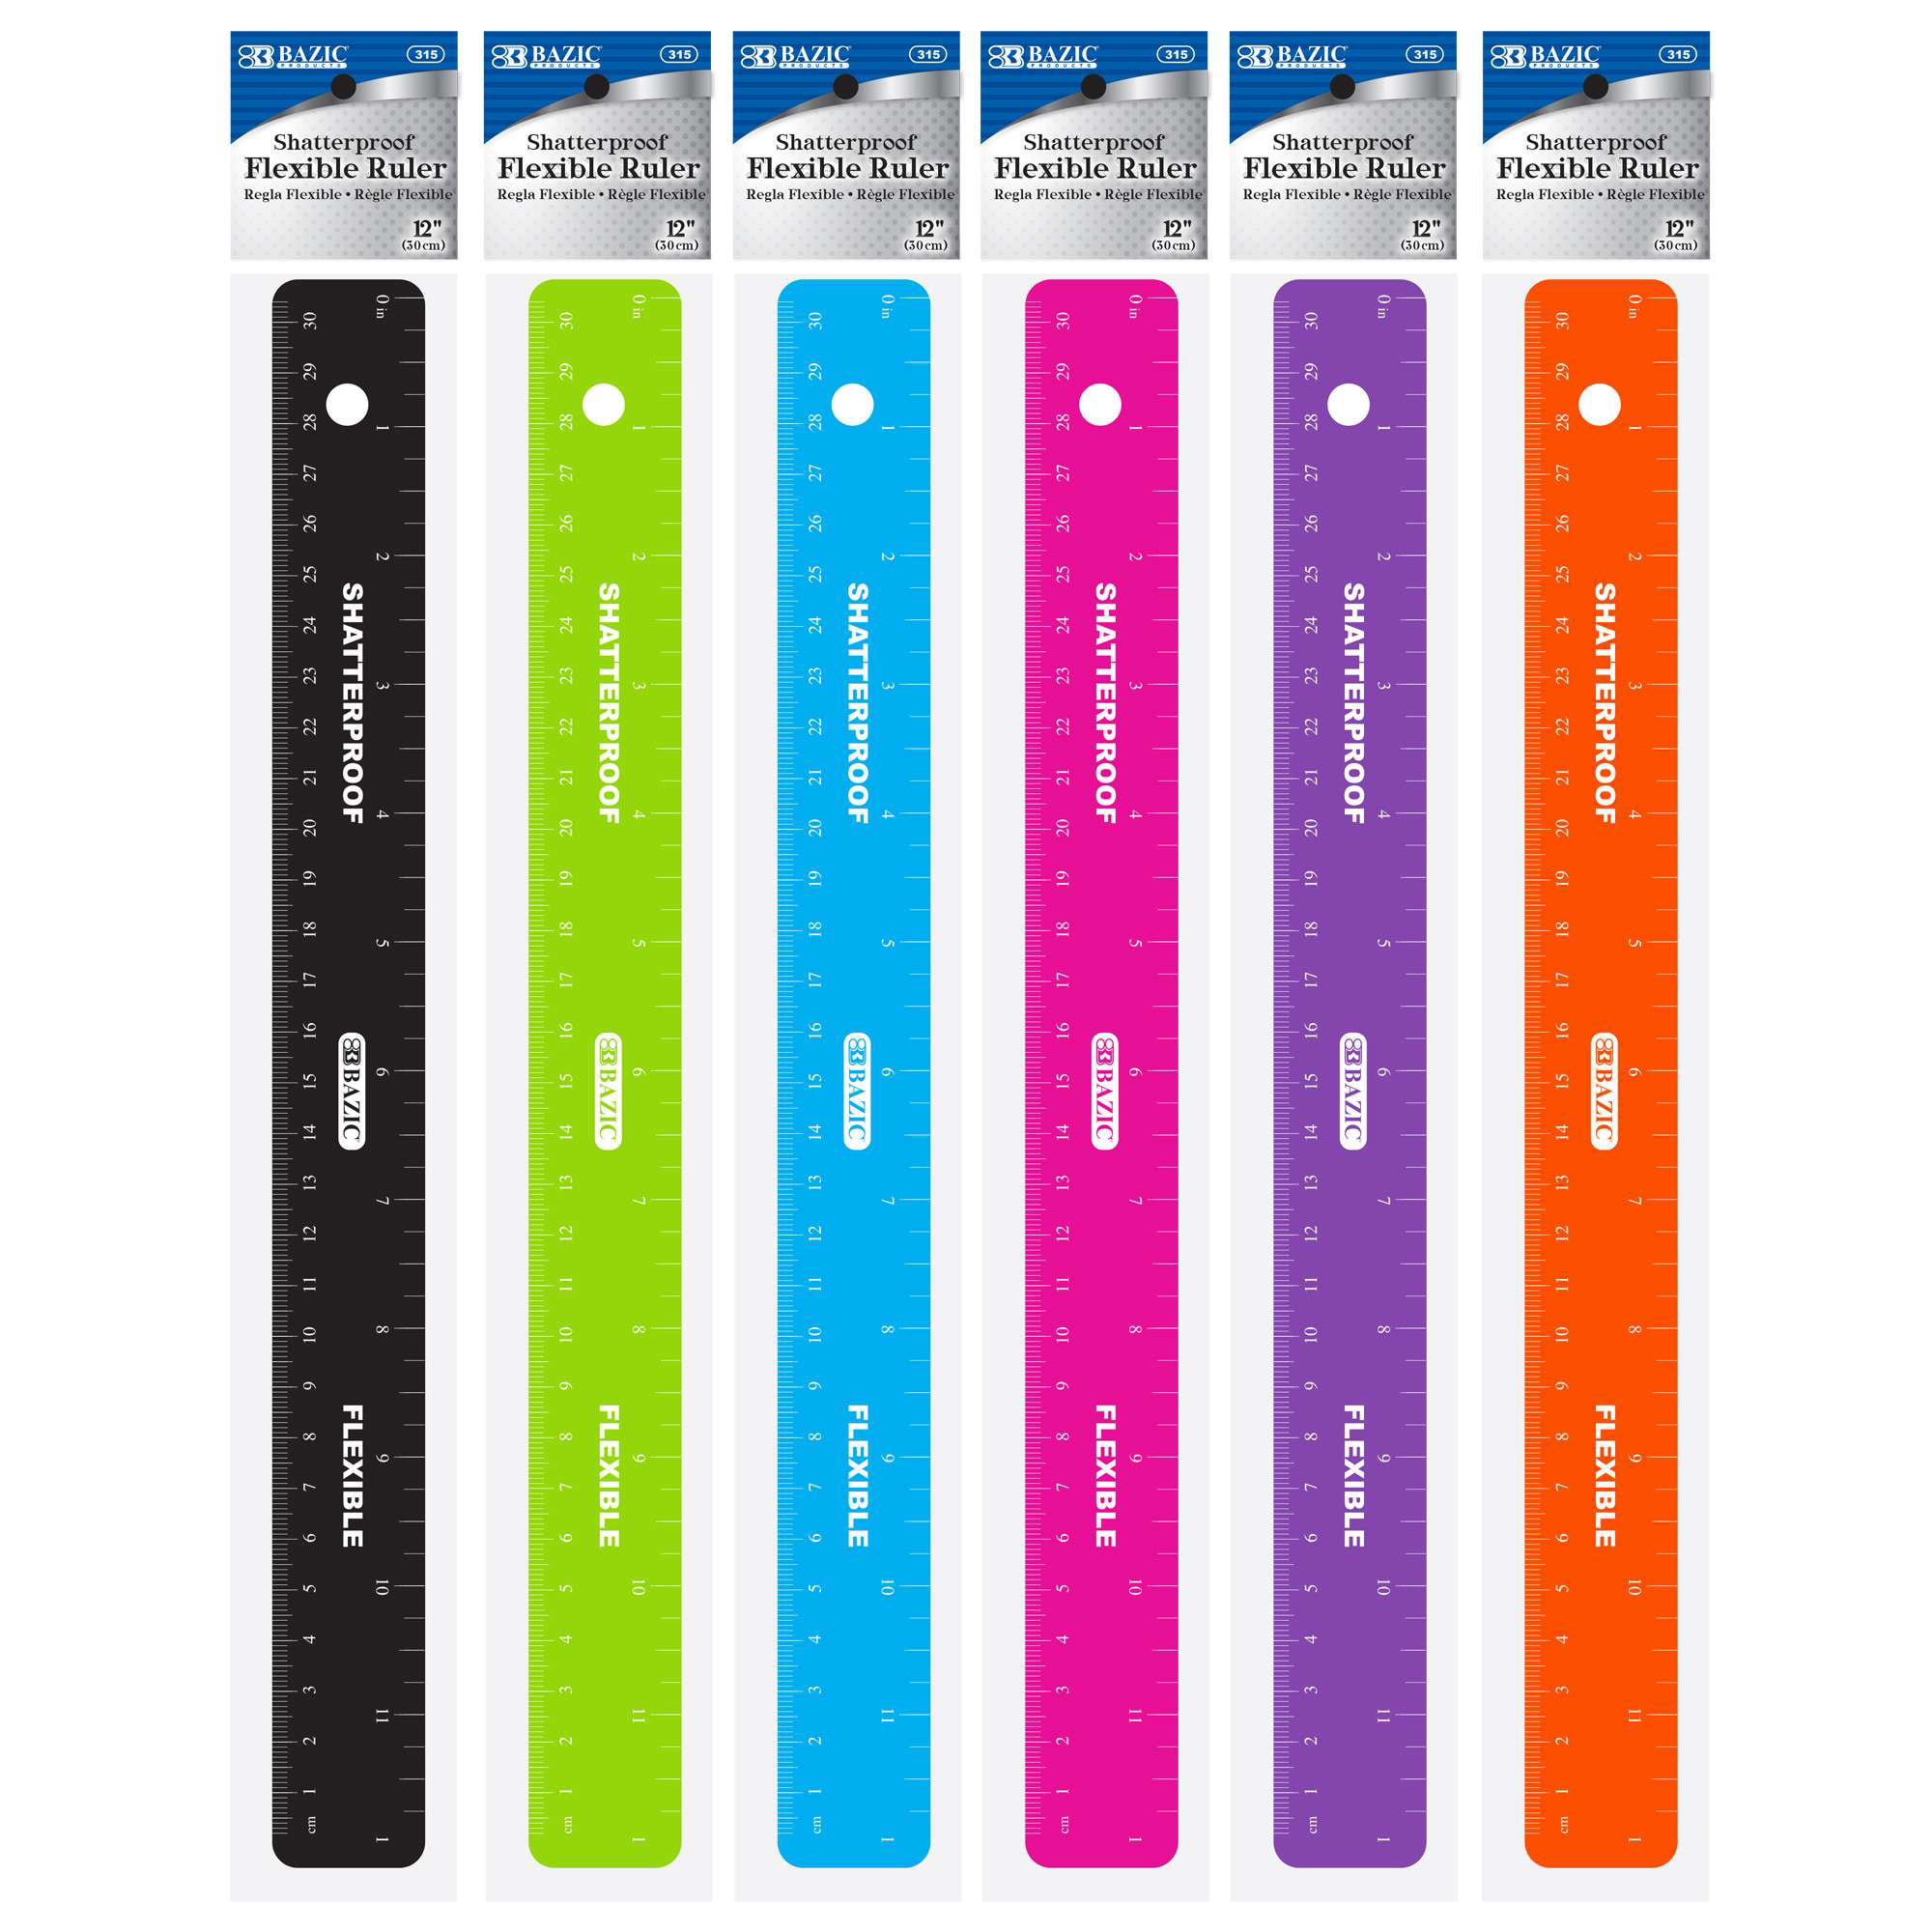 Details about   4 X CLEAR PLASTIC RULERS 30cm 12"inch FLEXIBLE SHATTER RESISTANT LIGHTWEIGHT 